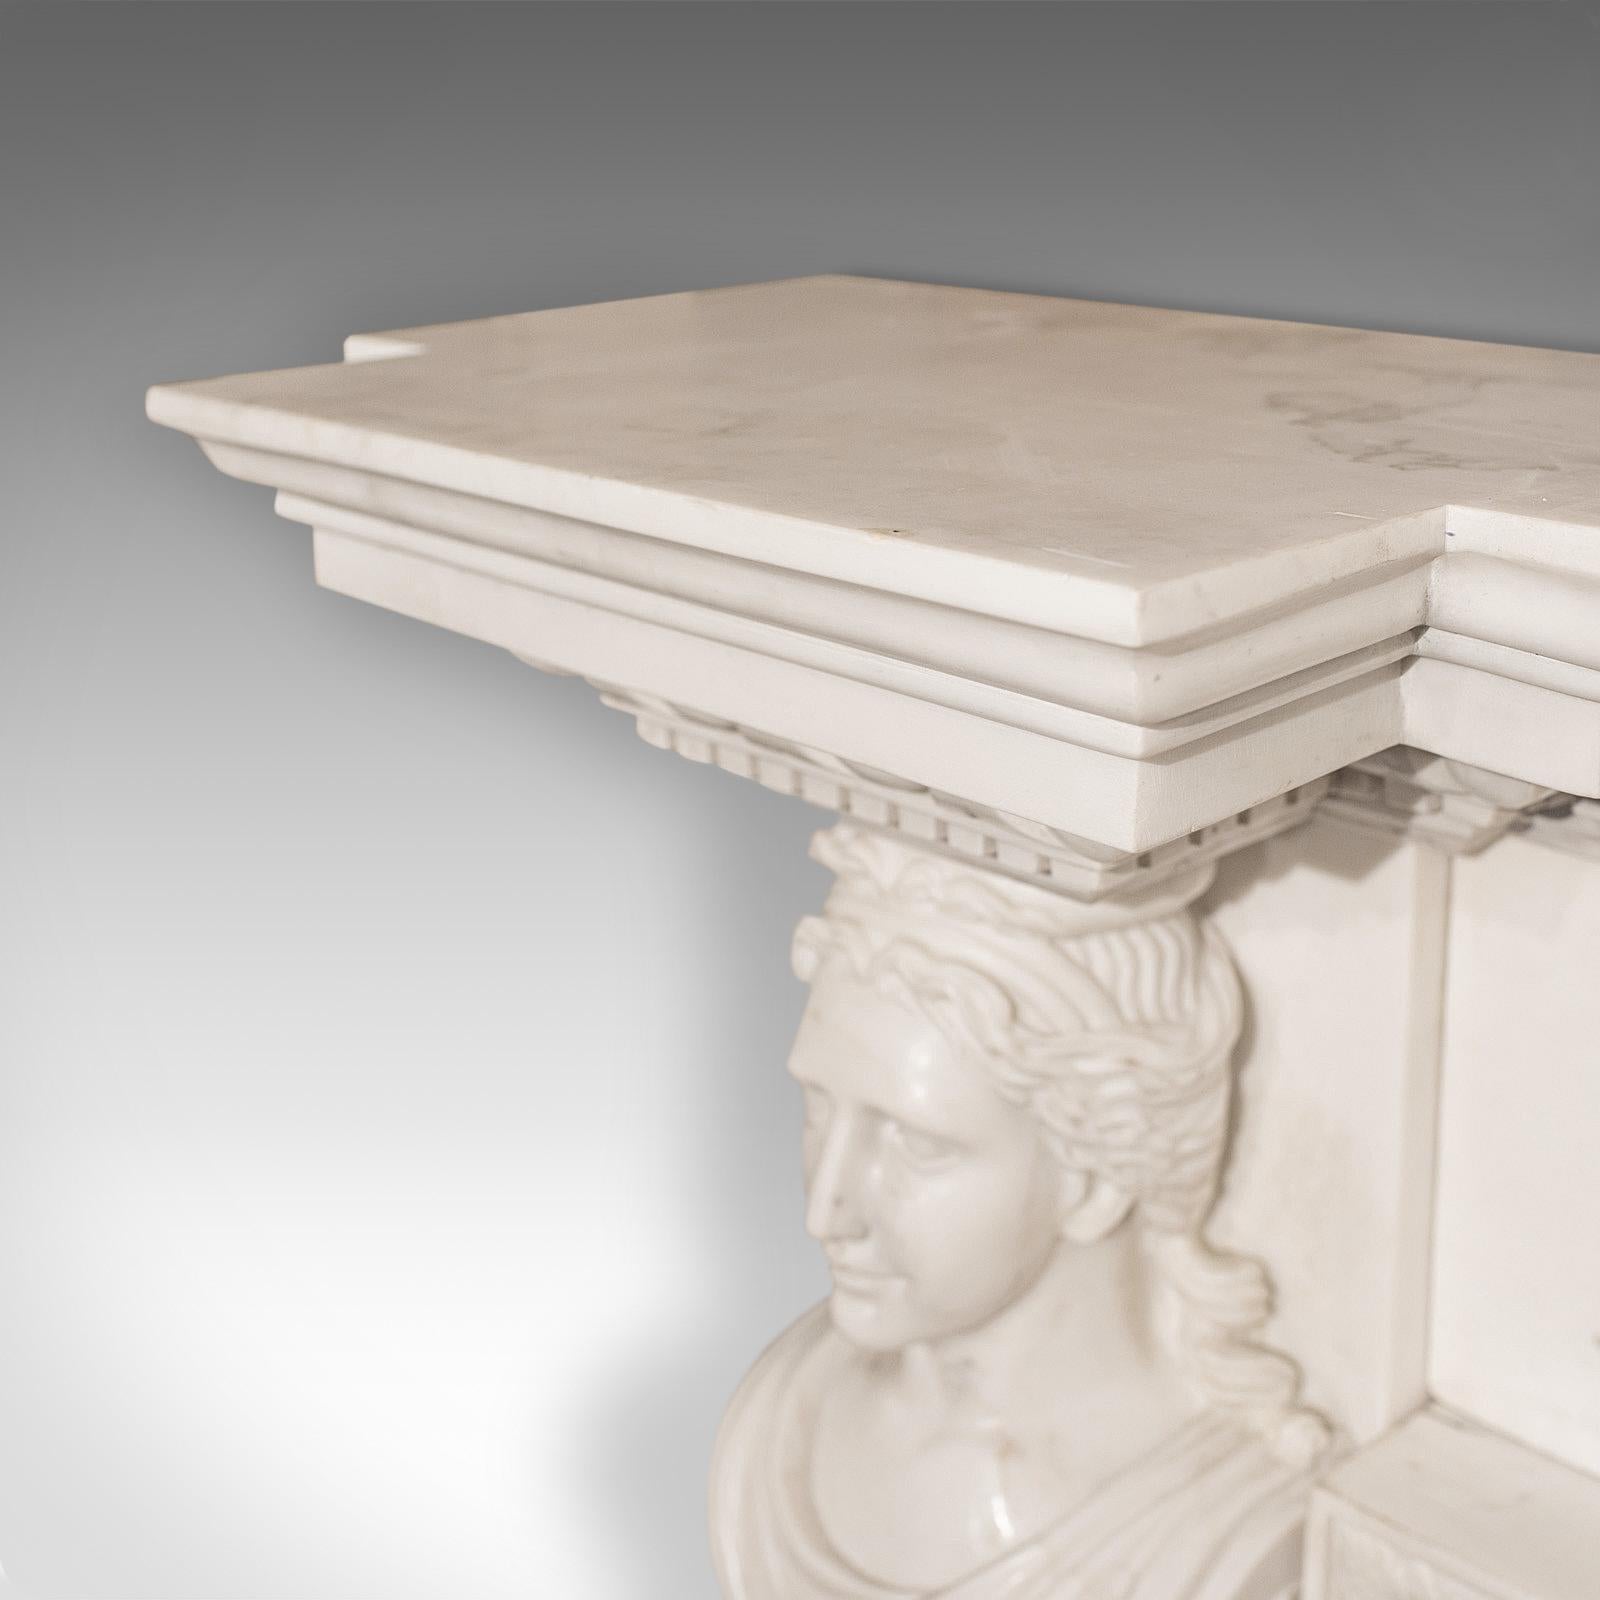 20th Century Large Monumental Fireplace, English, Marble, Fire Surround, Neoclassical Taste For Sale